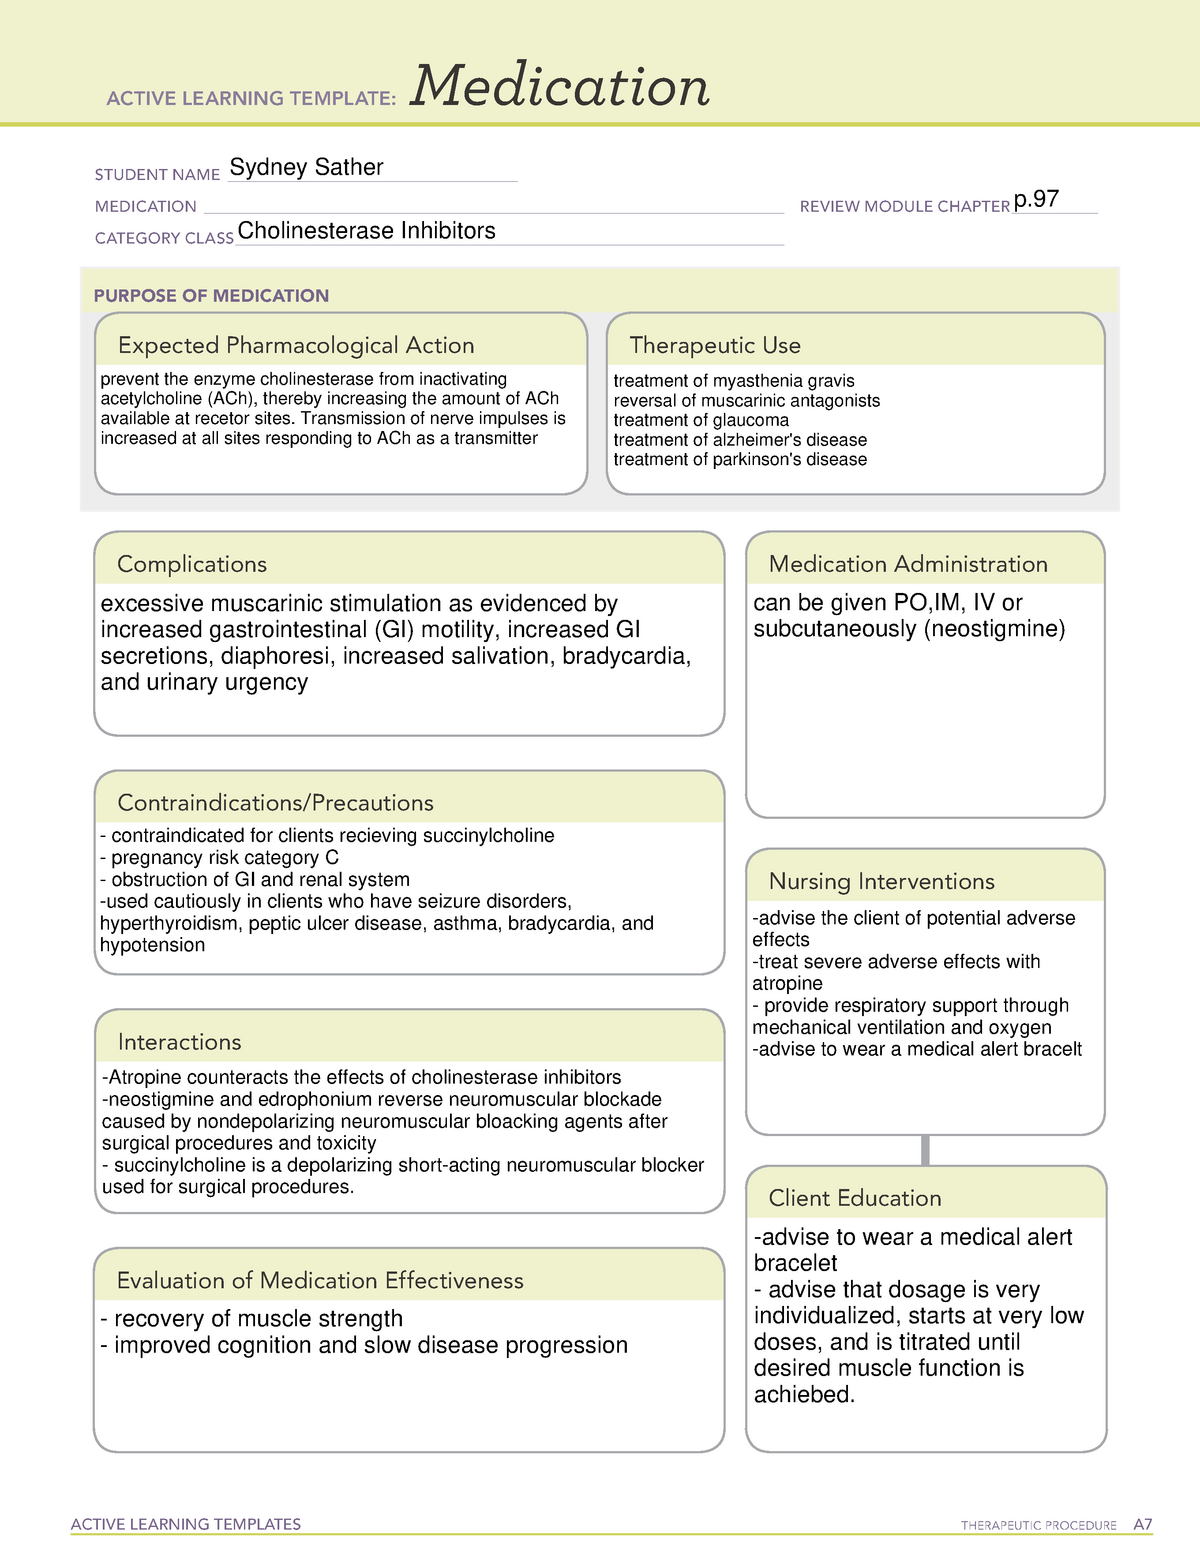 cholinesterase-inhibitors-pdf-active-learning-templates-therapeutic